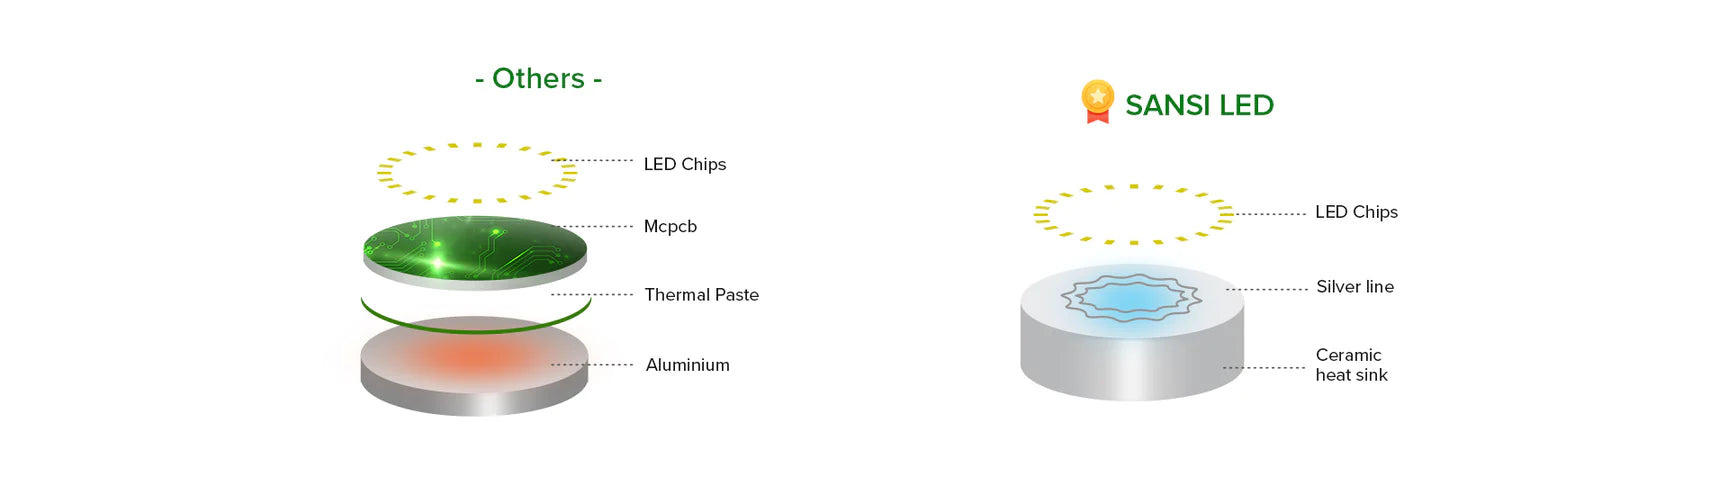 Chip on Ceramic (COC) Technology：SANSI's patented COC technology directly solder the LED chip on the ceramic heat sink, effectively reducing the system thermal resistance between the LED PN junction and the surface of the heat sink, resulting in faster heat conduction and higher productre liability.